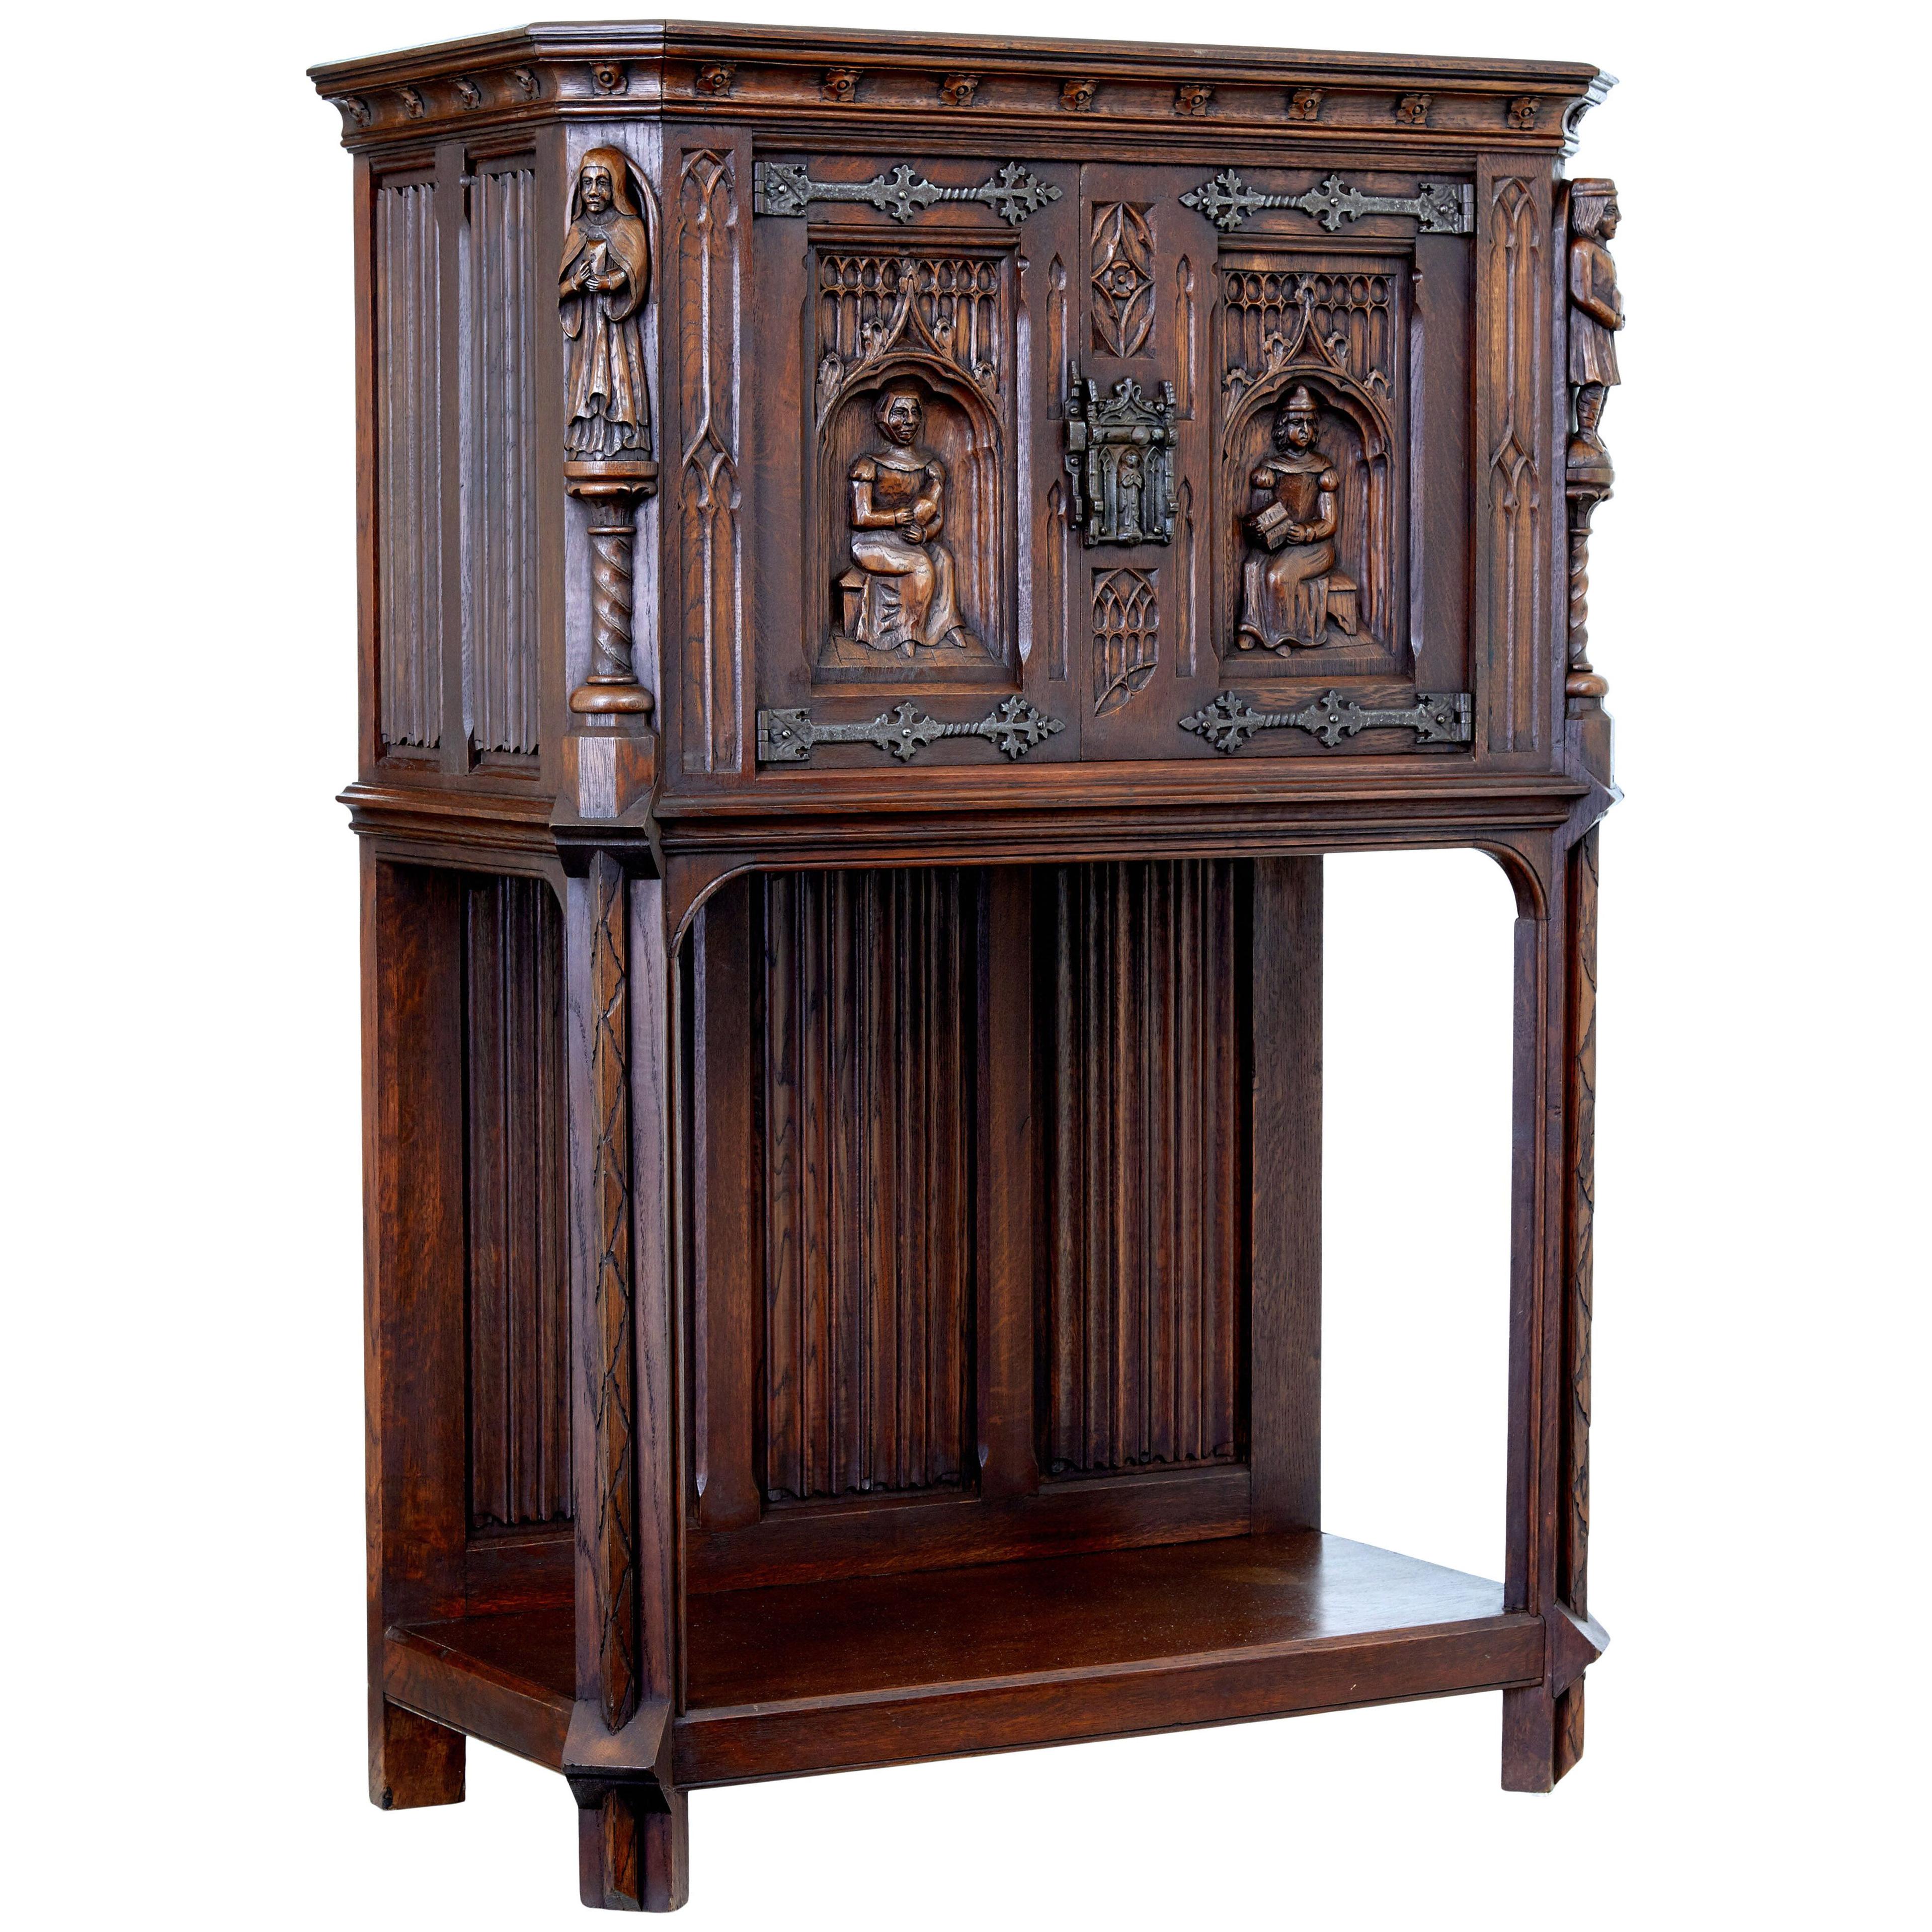 EARLY 20TH CENTURY CARVED OAK RENAISSANCE REVIVAL CUPBOARD